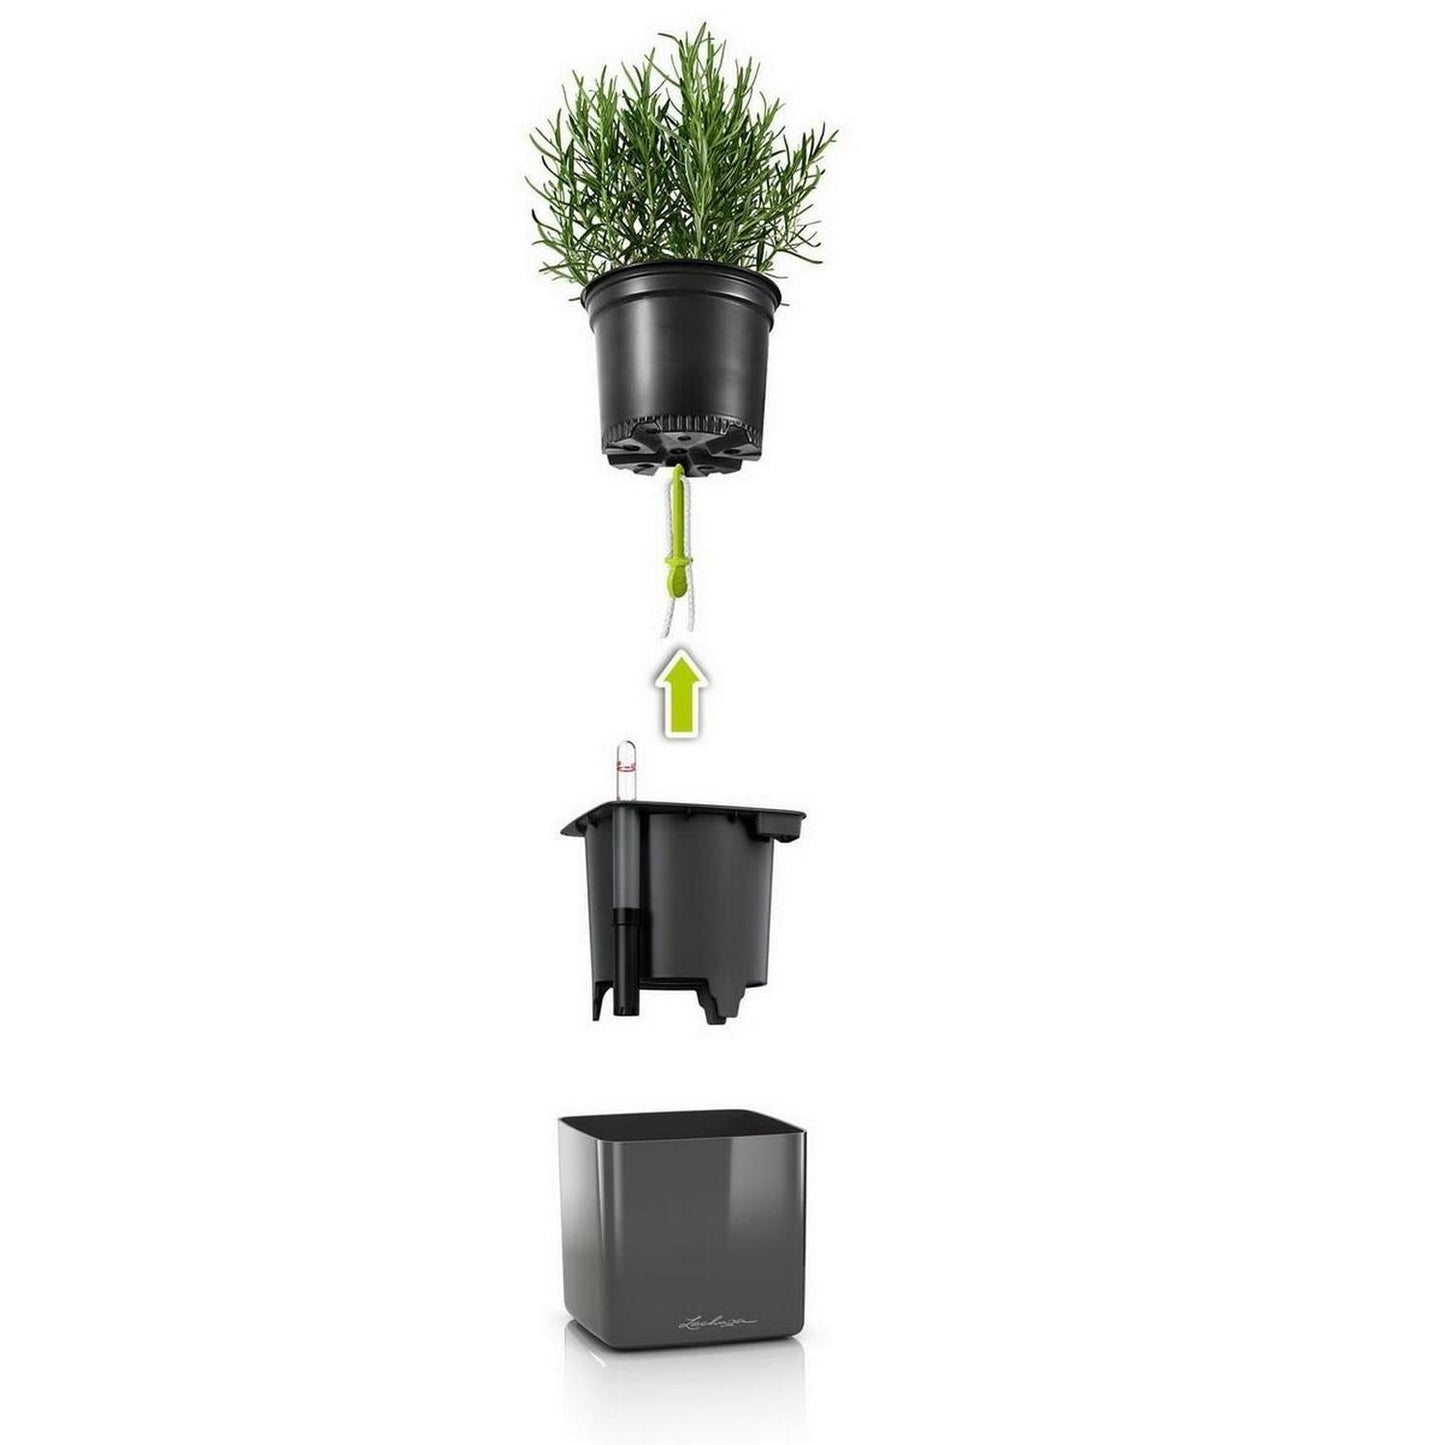 LECHUZA CUBE Glossy Cat 14 Black Highgloss Poly Resin Table Self-watering Planter with Water Level Indicator H14 L14 W14 cm, 1.4L - citiplants.com